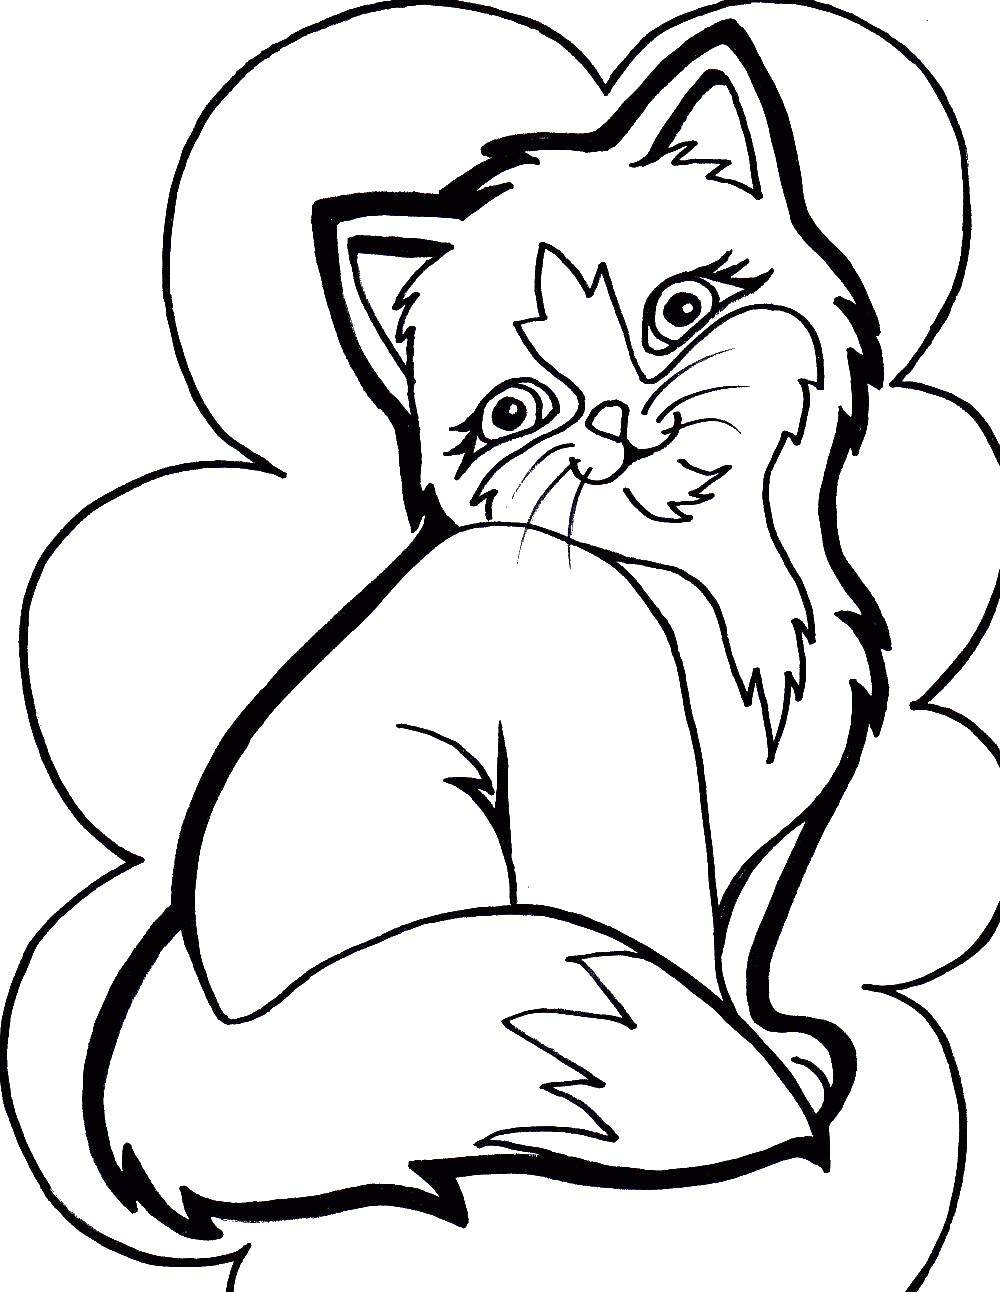 Coloring Flirty kitty. Category Animals. Tags:  Animals, kitten.